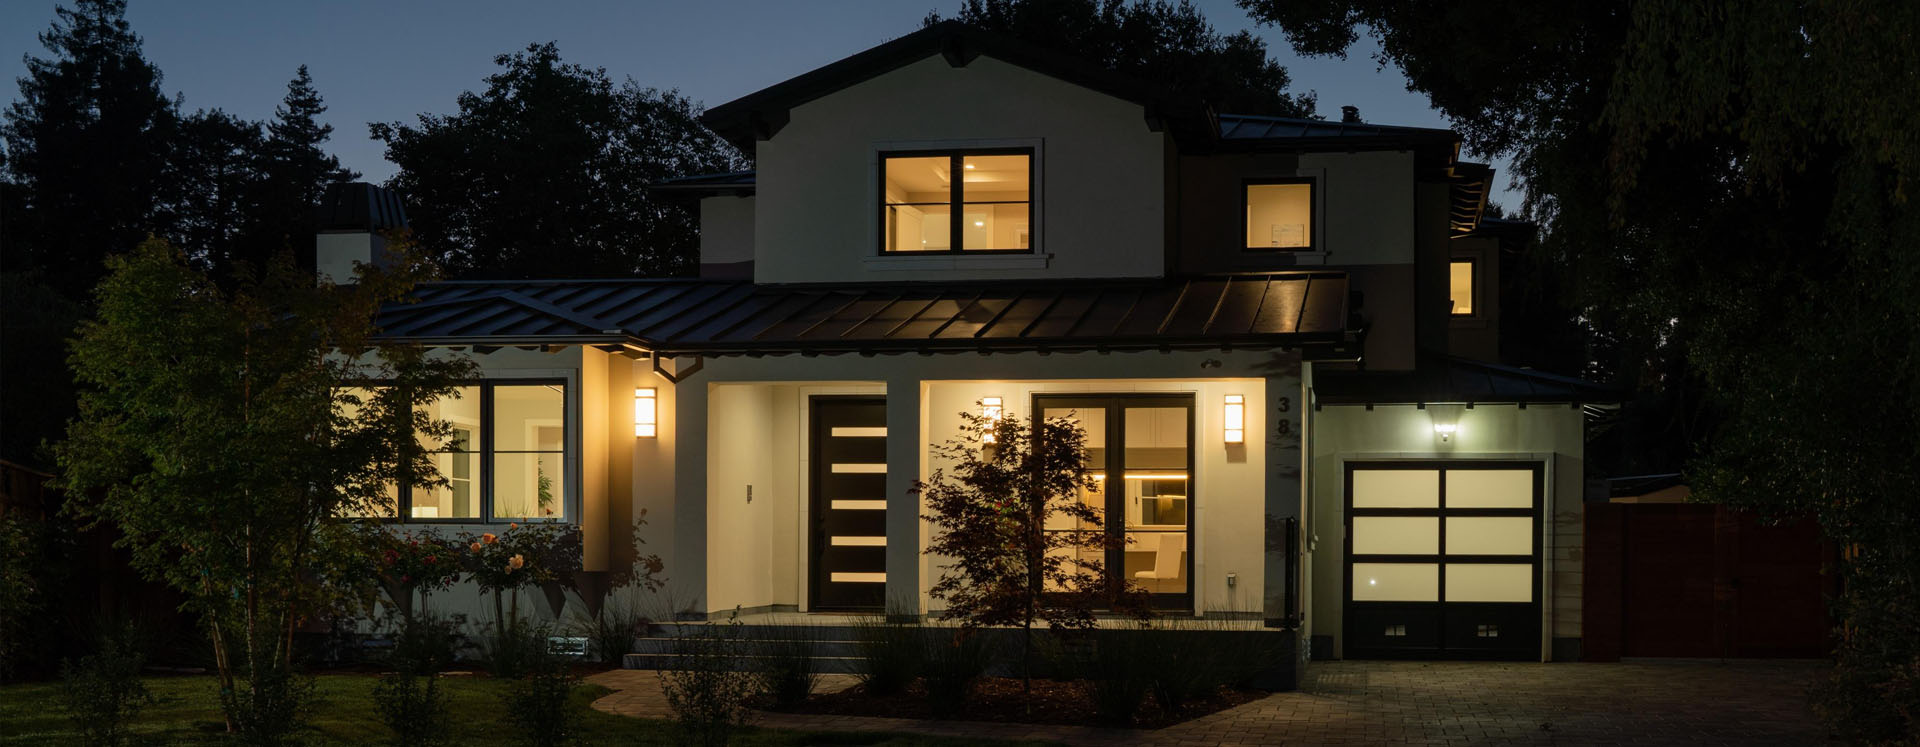 All-in-one Residential ESS 2.56kWh